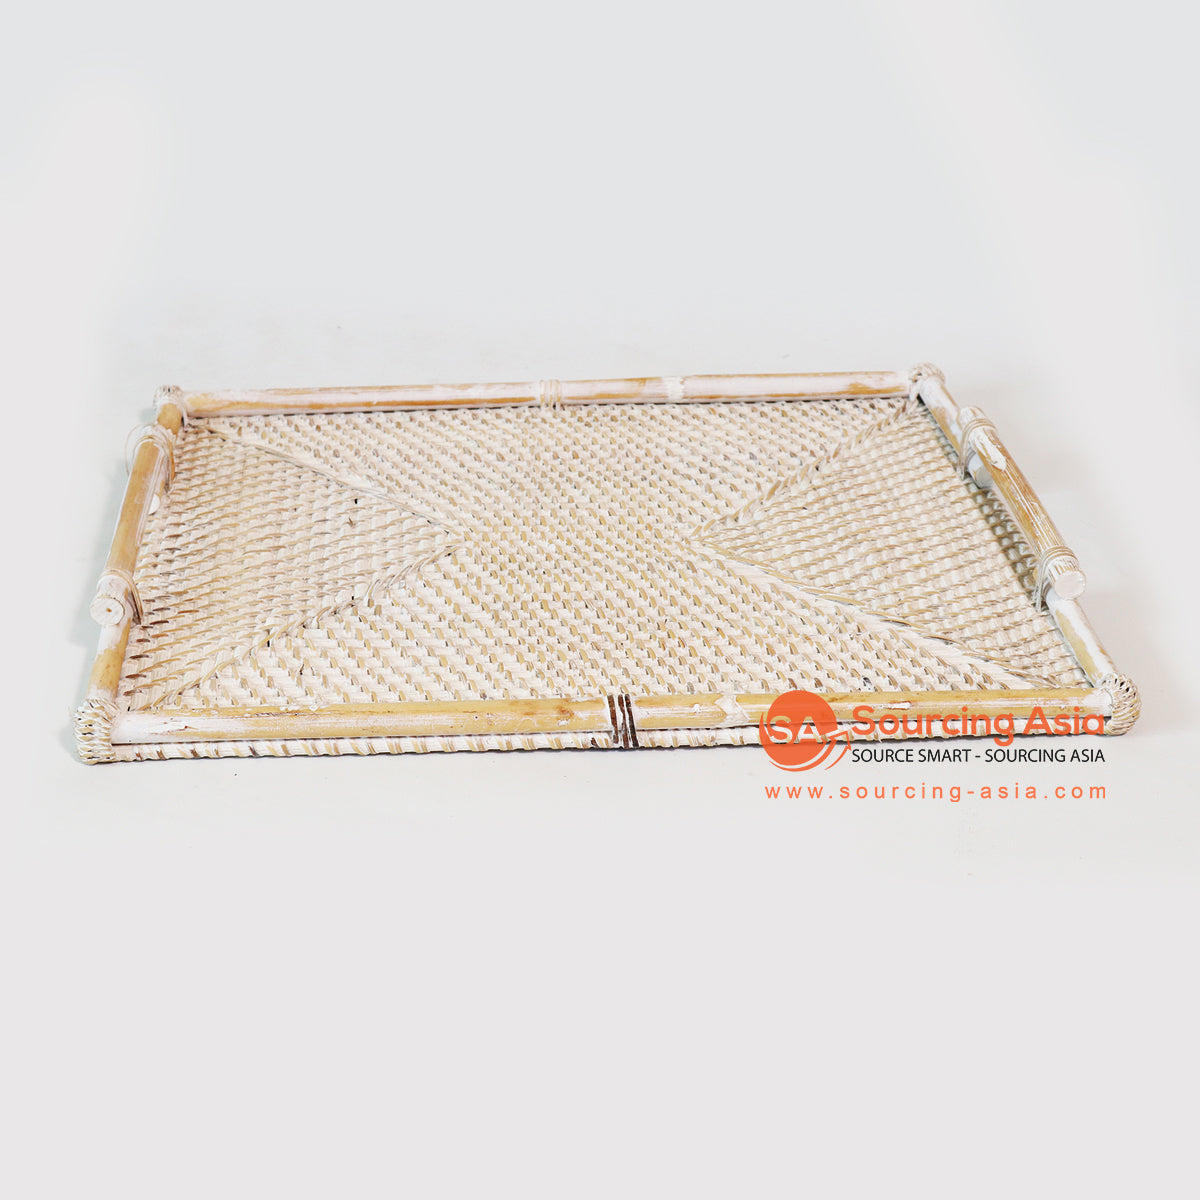 MTIC025-1 WHITE WASH WOVEN RATTAN SQUARE TRAY WITH EDGES